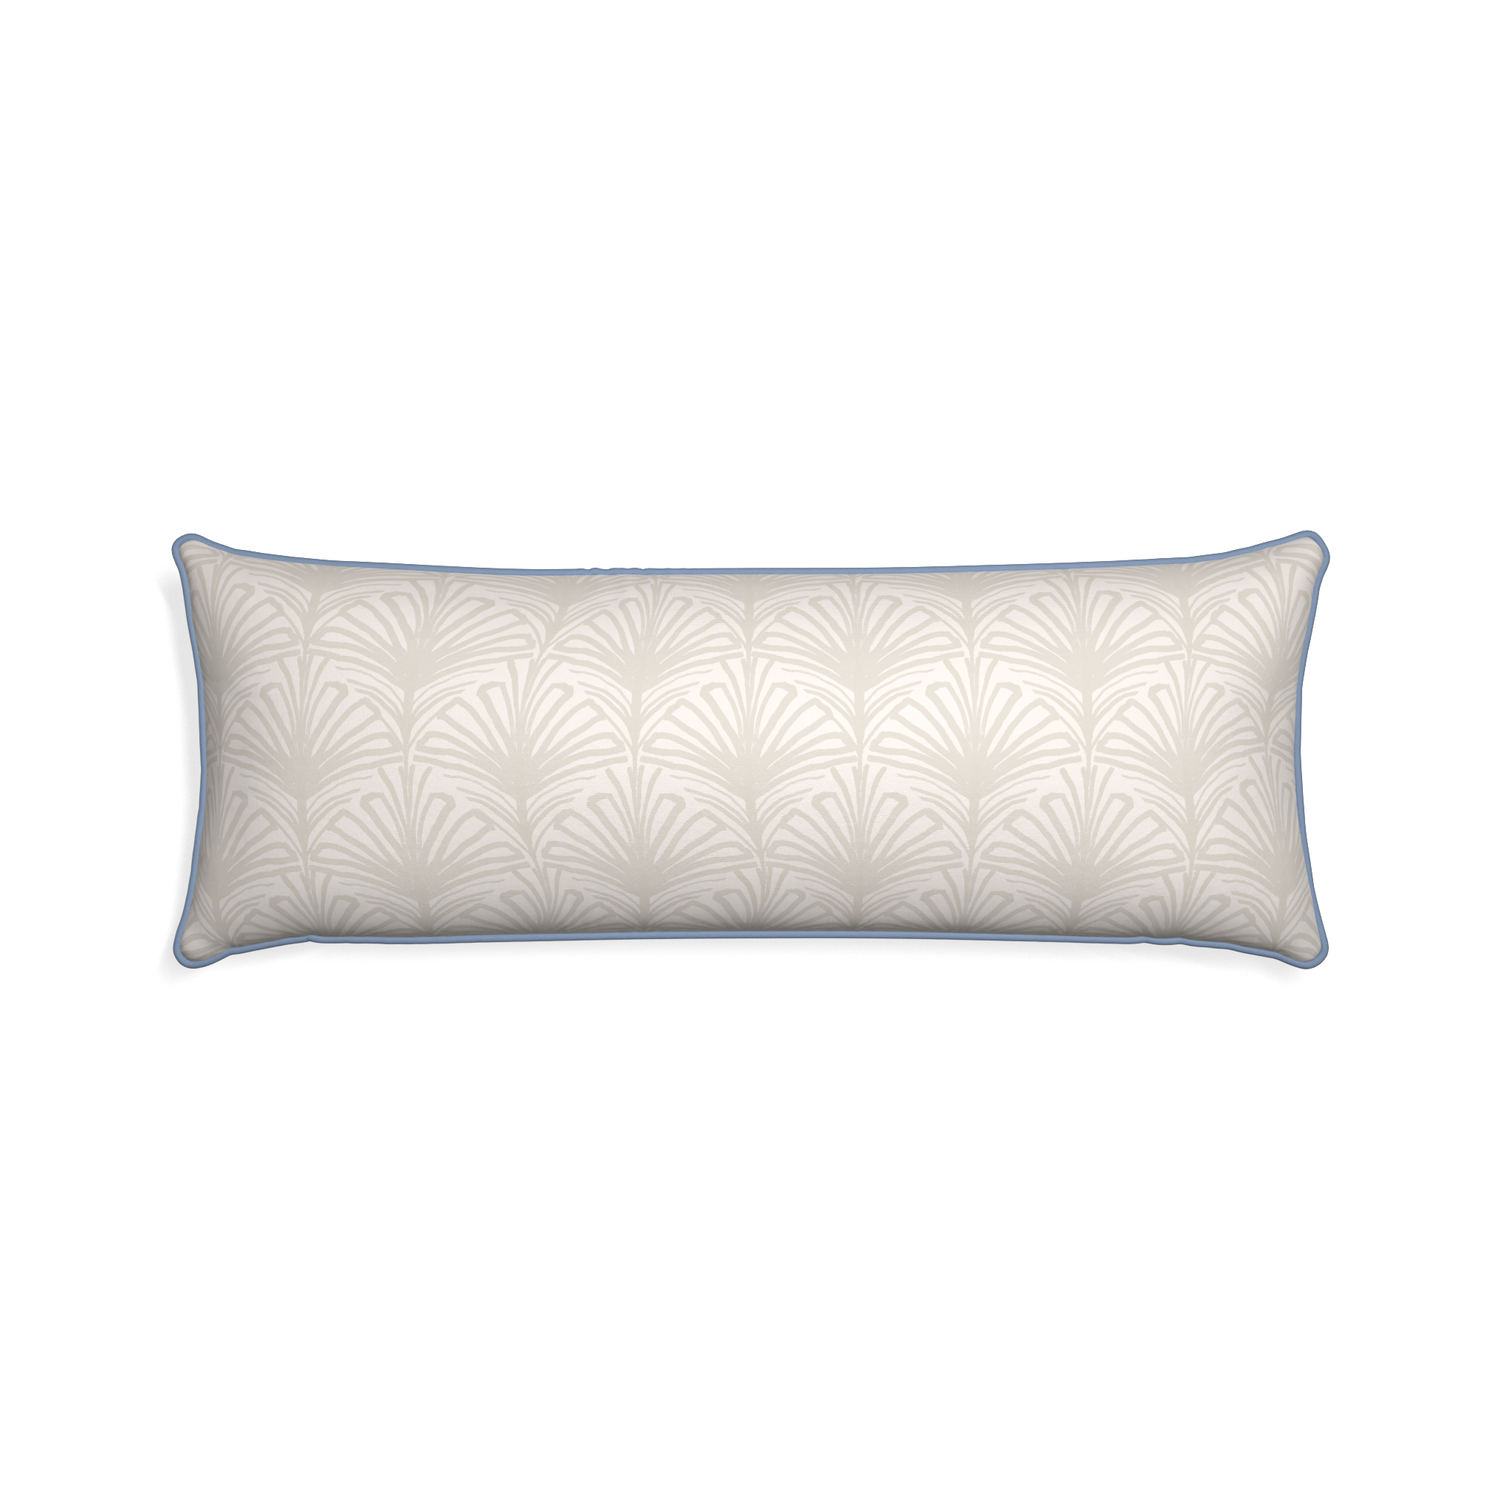 Xl-lumbar suzy sand custom pillow with sky piping on white background